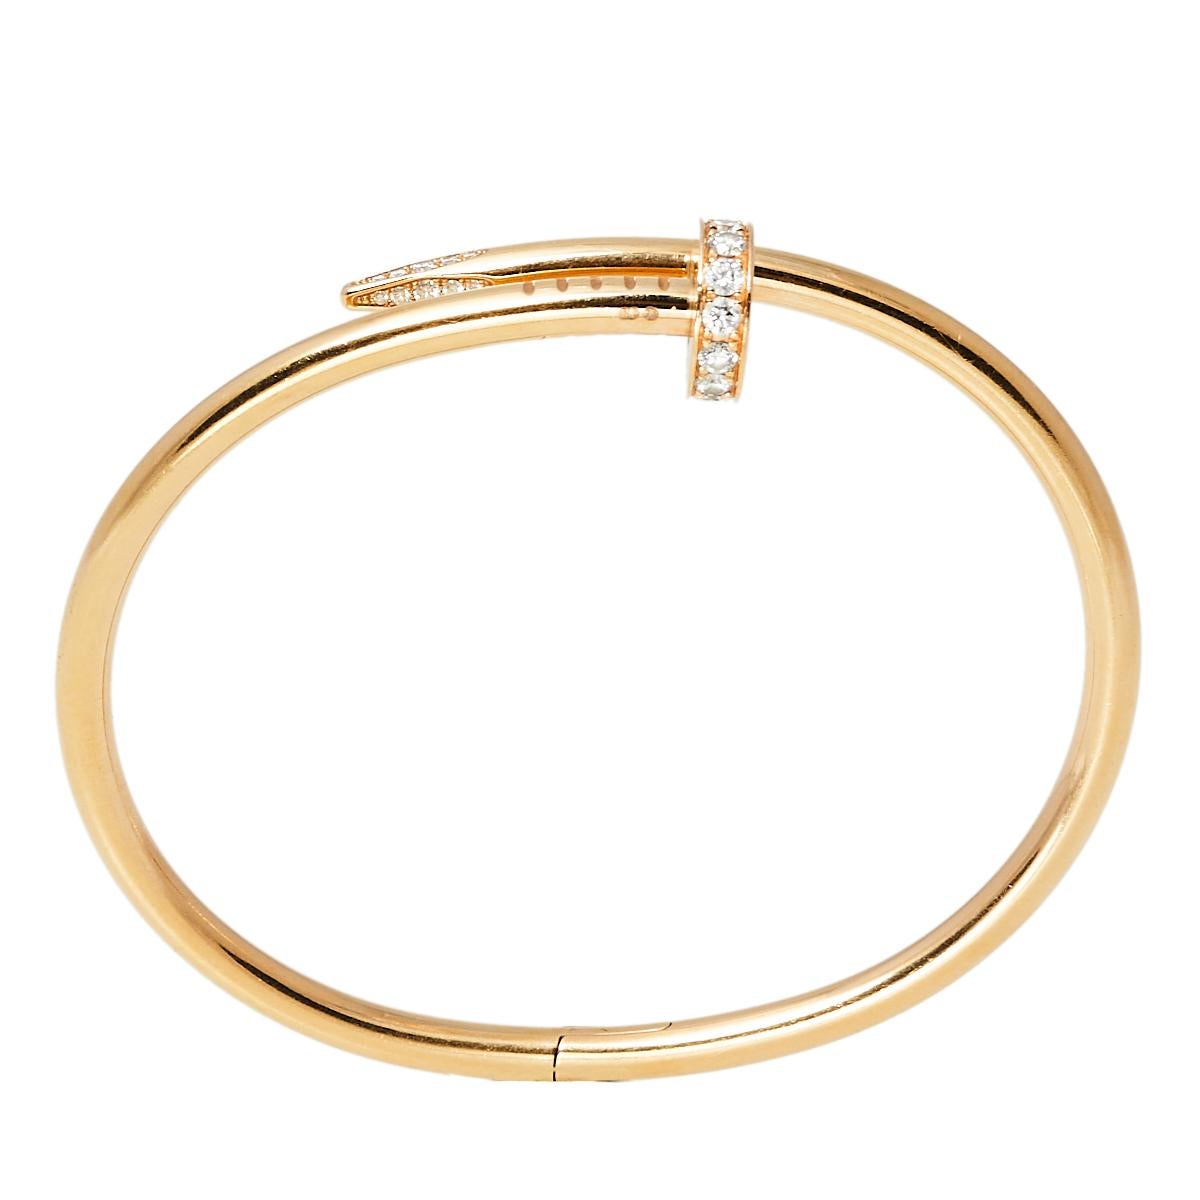 The Juste un Clou collection from Cartier is all about making ordinary objects into exquisite pieces of jewelry. We see the idea beautifully translated into this authentic Juste un Clou bracelet. It is a creation that proudly represents the